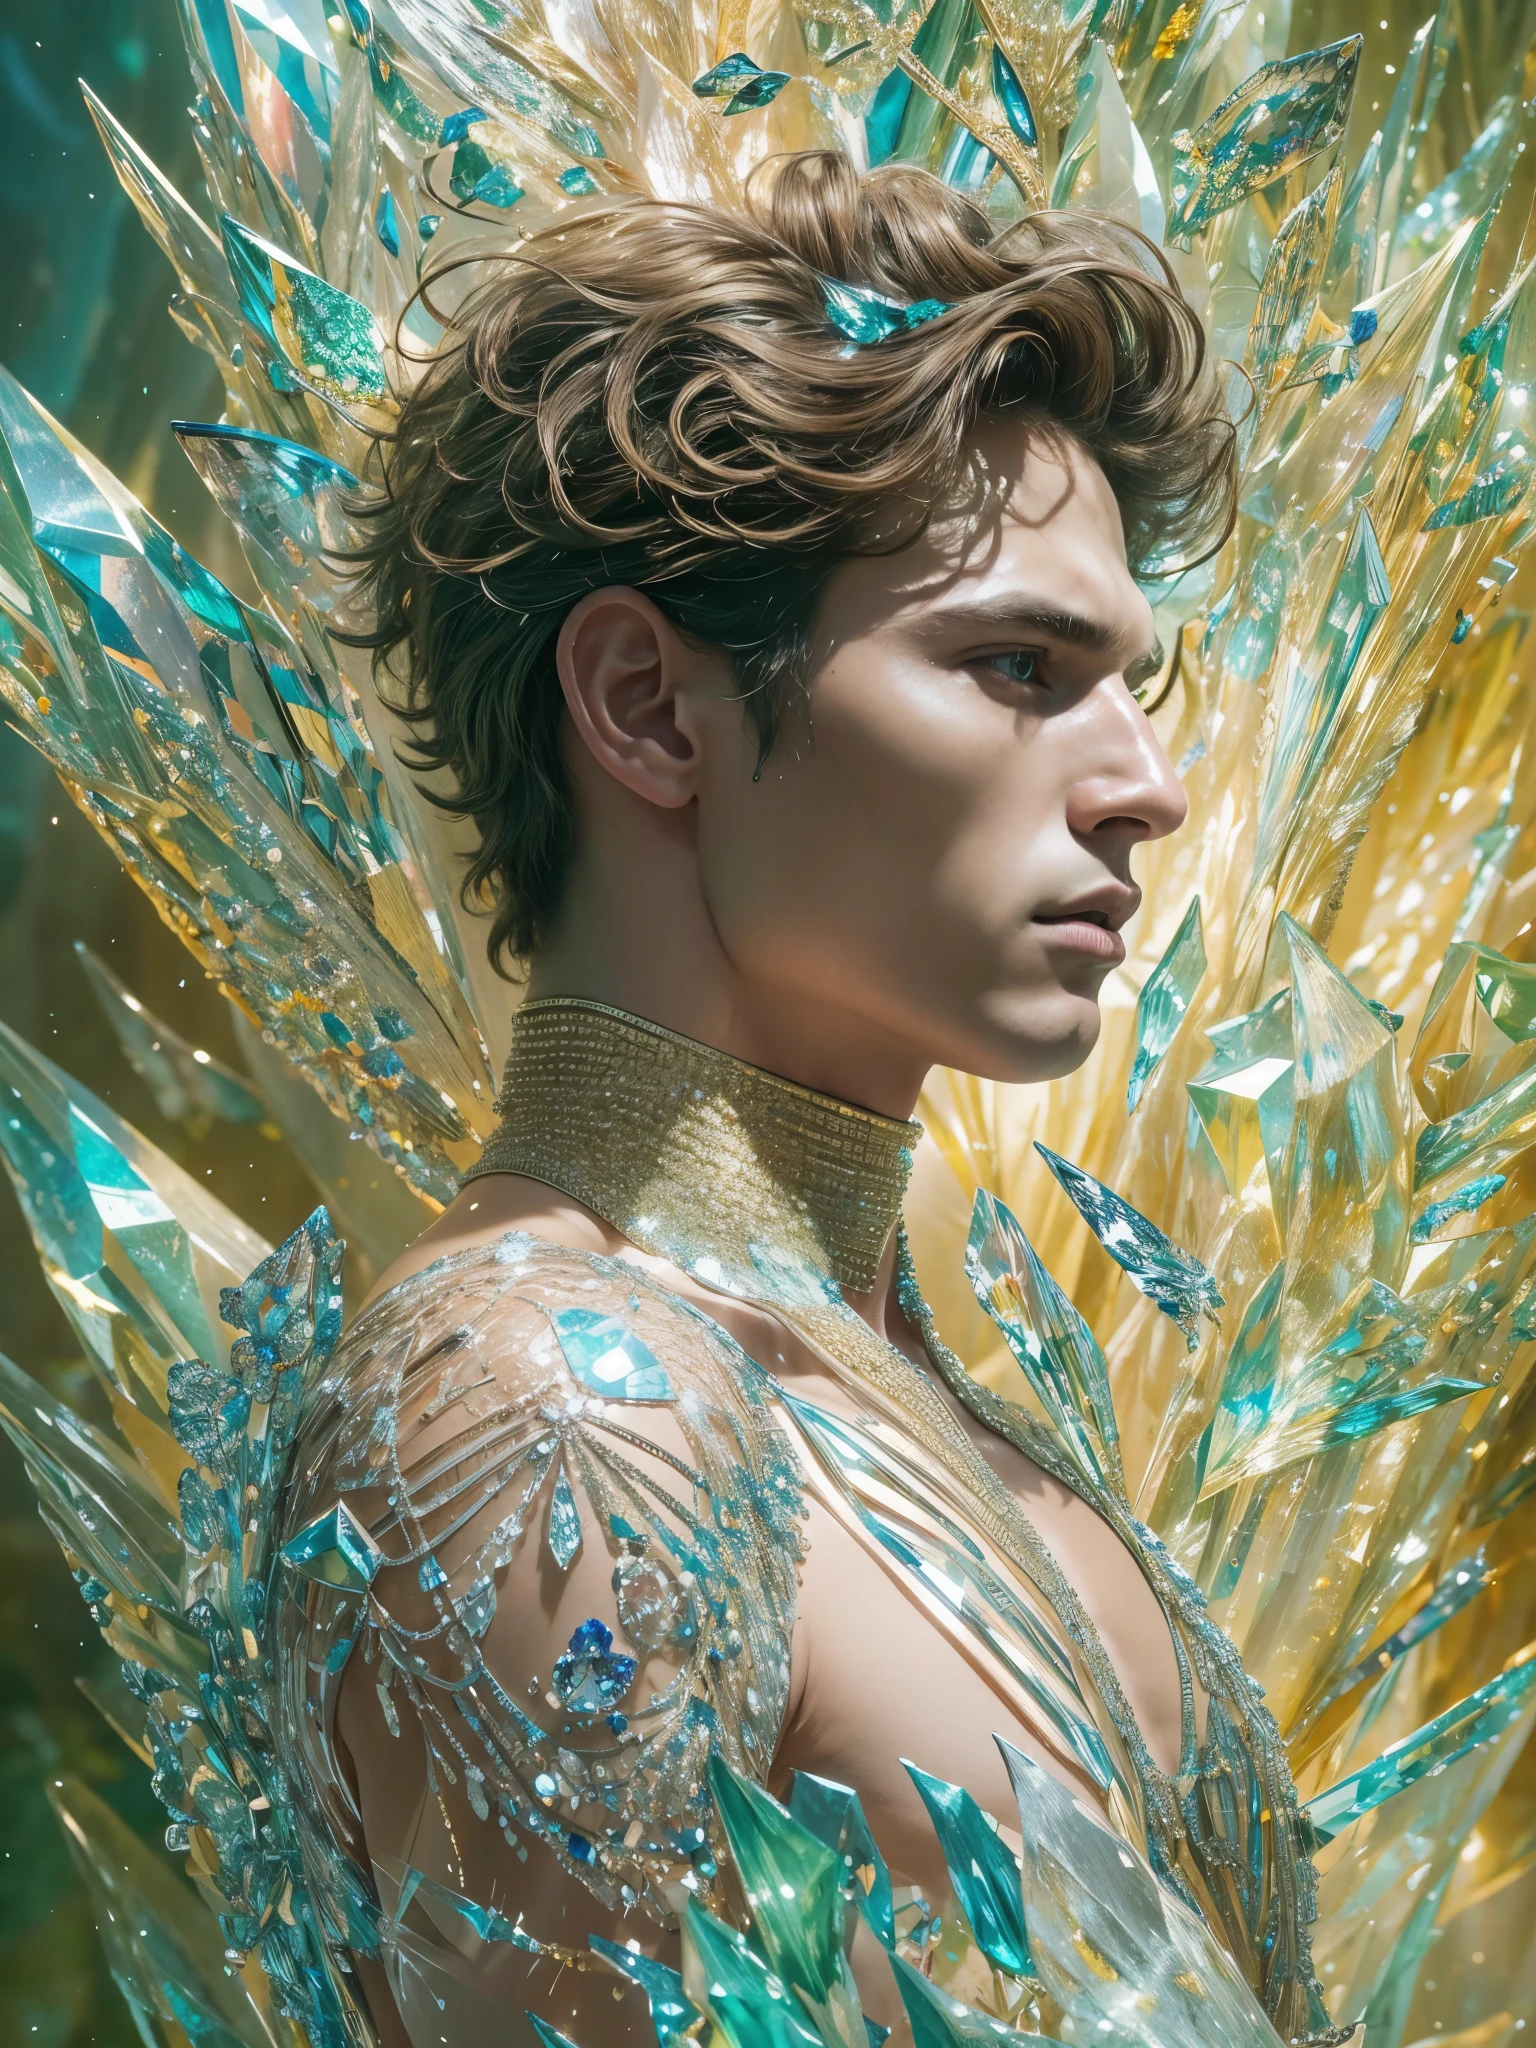 (photorealistic, masterpiece, best quality, highres, highly detailed), a young and handsome man posing nude surrounded by crystal, personification of crystal as a man, 18-year-old man, vibrant colors, realistic lighting, sparkling reflections, radiant and transparent skin, chiseled physique, intense gaze, striking features, well-defined jawline, tousled hair, confident and relaxed posture, artistic composition, elegant and graceful pose, captivating and alluring expression, the man's body covered with delicate and intricate crystals, creating a mesmerizing and ethereal effect, immaculate attention to detail, flawless rendering of textures, harmonious blend of realism and fantasy, incredible depth and dimension, attention-grabbing contrast between the smoothness of the man's skin and the texture of the crystals, seamless integration of the human form with the crystal surroundings, evoking a sense of grace, beauty, and mystery, powerful symbolism of purity and strength embodied by the crystal elements, expert use of shadows and highlights to enhance the three-dimensional quality of the image, masterful use of color to create a dreamlike atmosphere, refined and subtle nuances of light and shade, creating a visually stunning and emotionally impactful scene, exquisite craftsmanship and skillful execution, capturing the essence of both the human form and the ethereal beauty of crystals, creating an unforgettable and awe-inspiring visual experience.